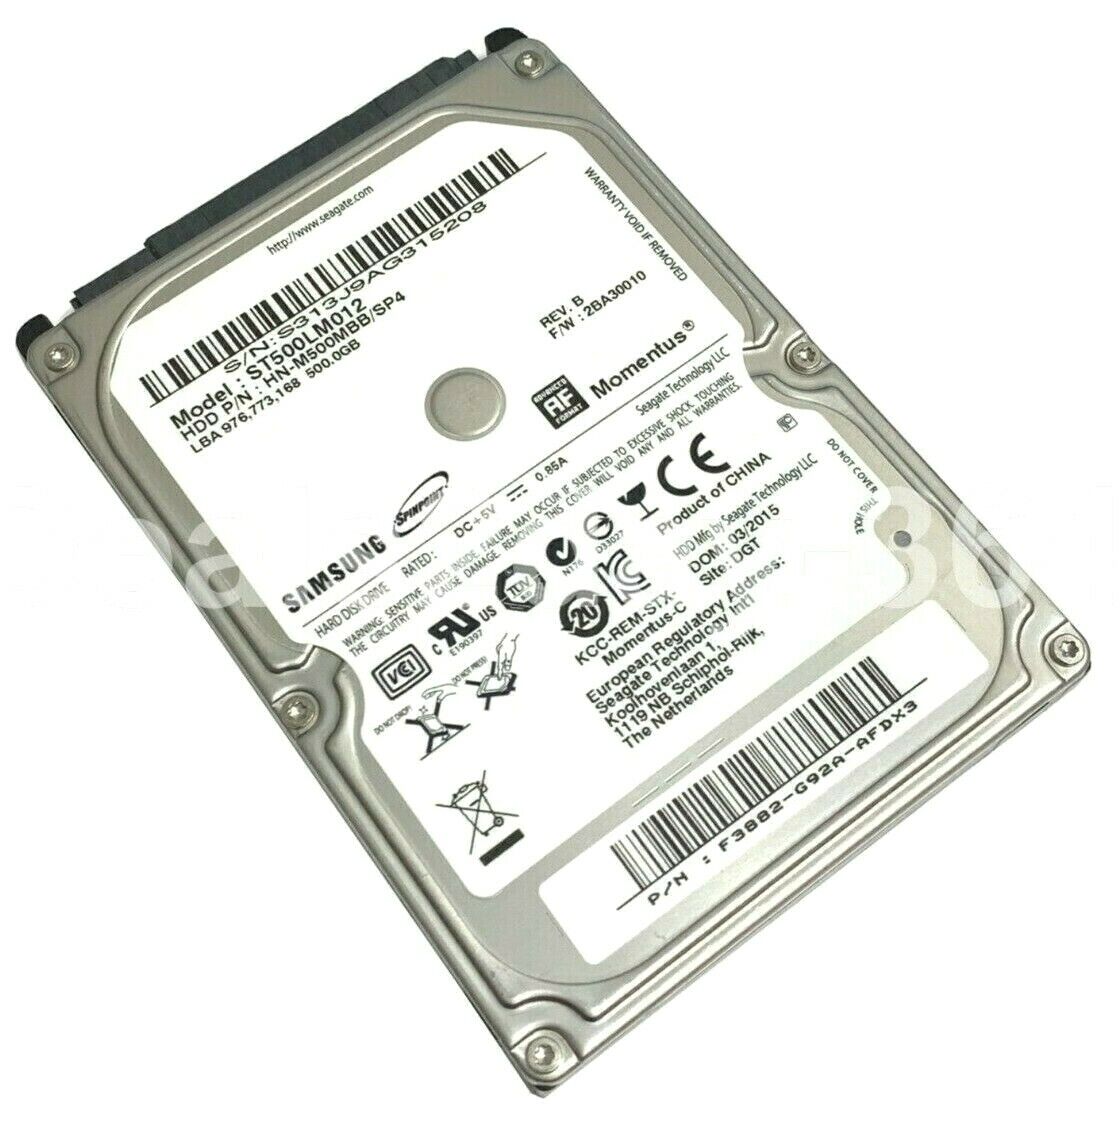 SAMSUNG ST500LM012 500GB 5.4K 6G 8MB 2.5in SATA Drive for Laptops PS4 XBOX One S